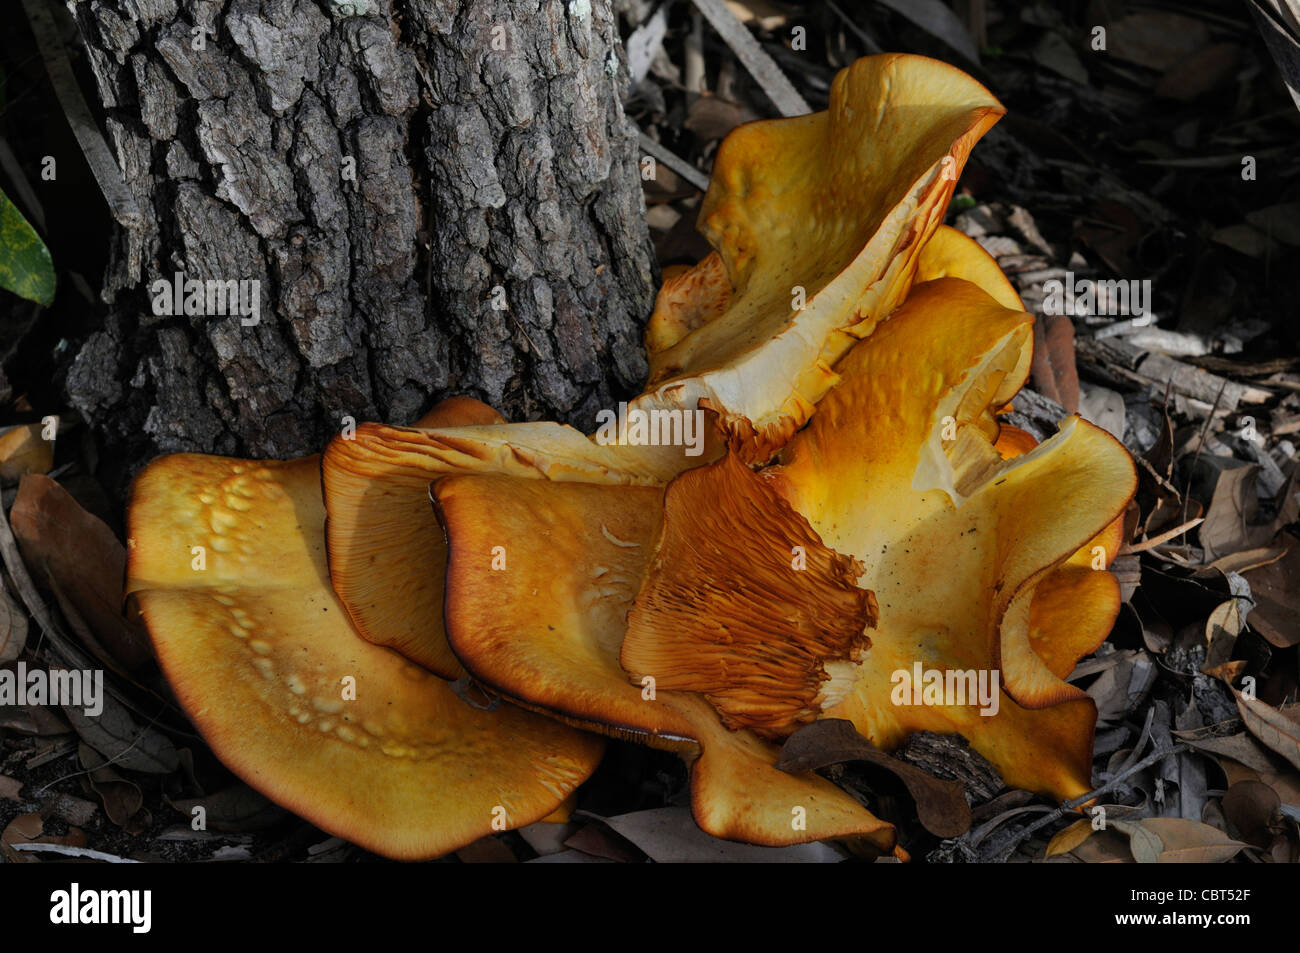 Orange peel fungus (Aleuria aurantia) growing at the bottom of a tree in central Florida Stock Photo